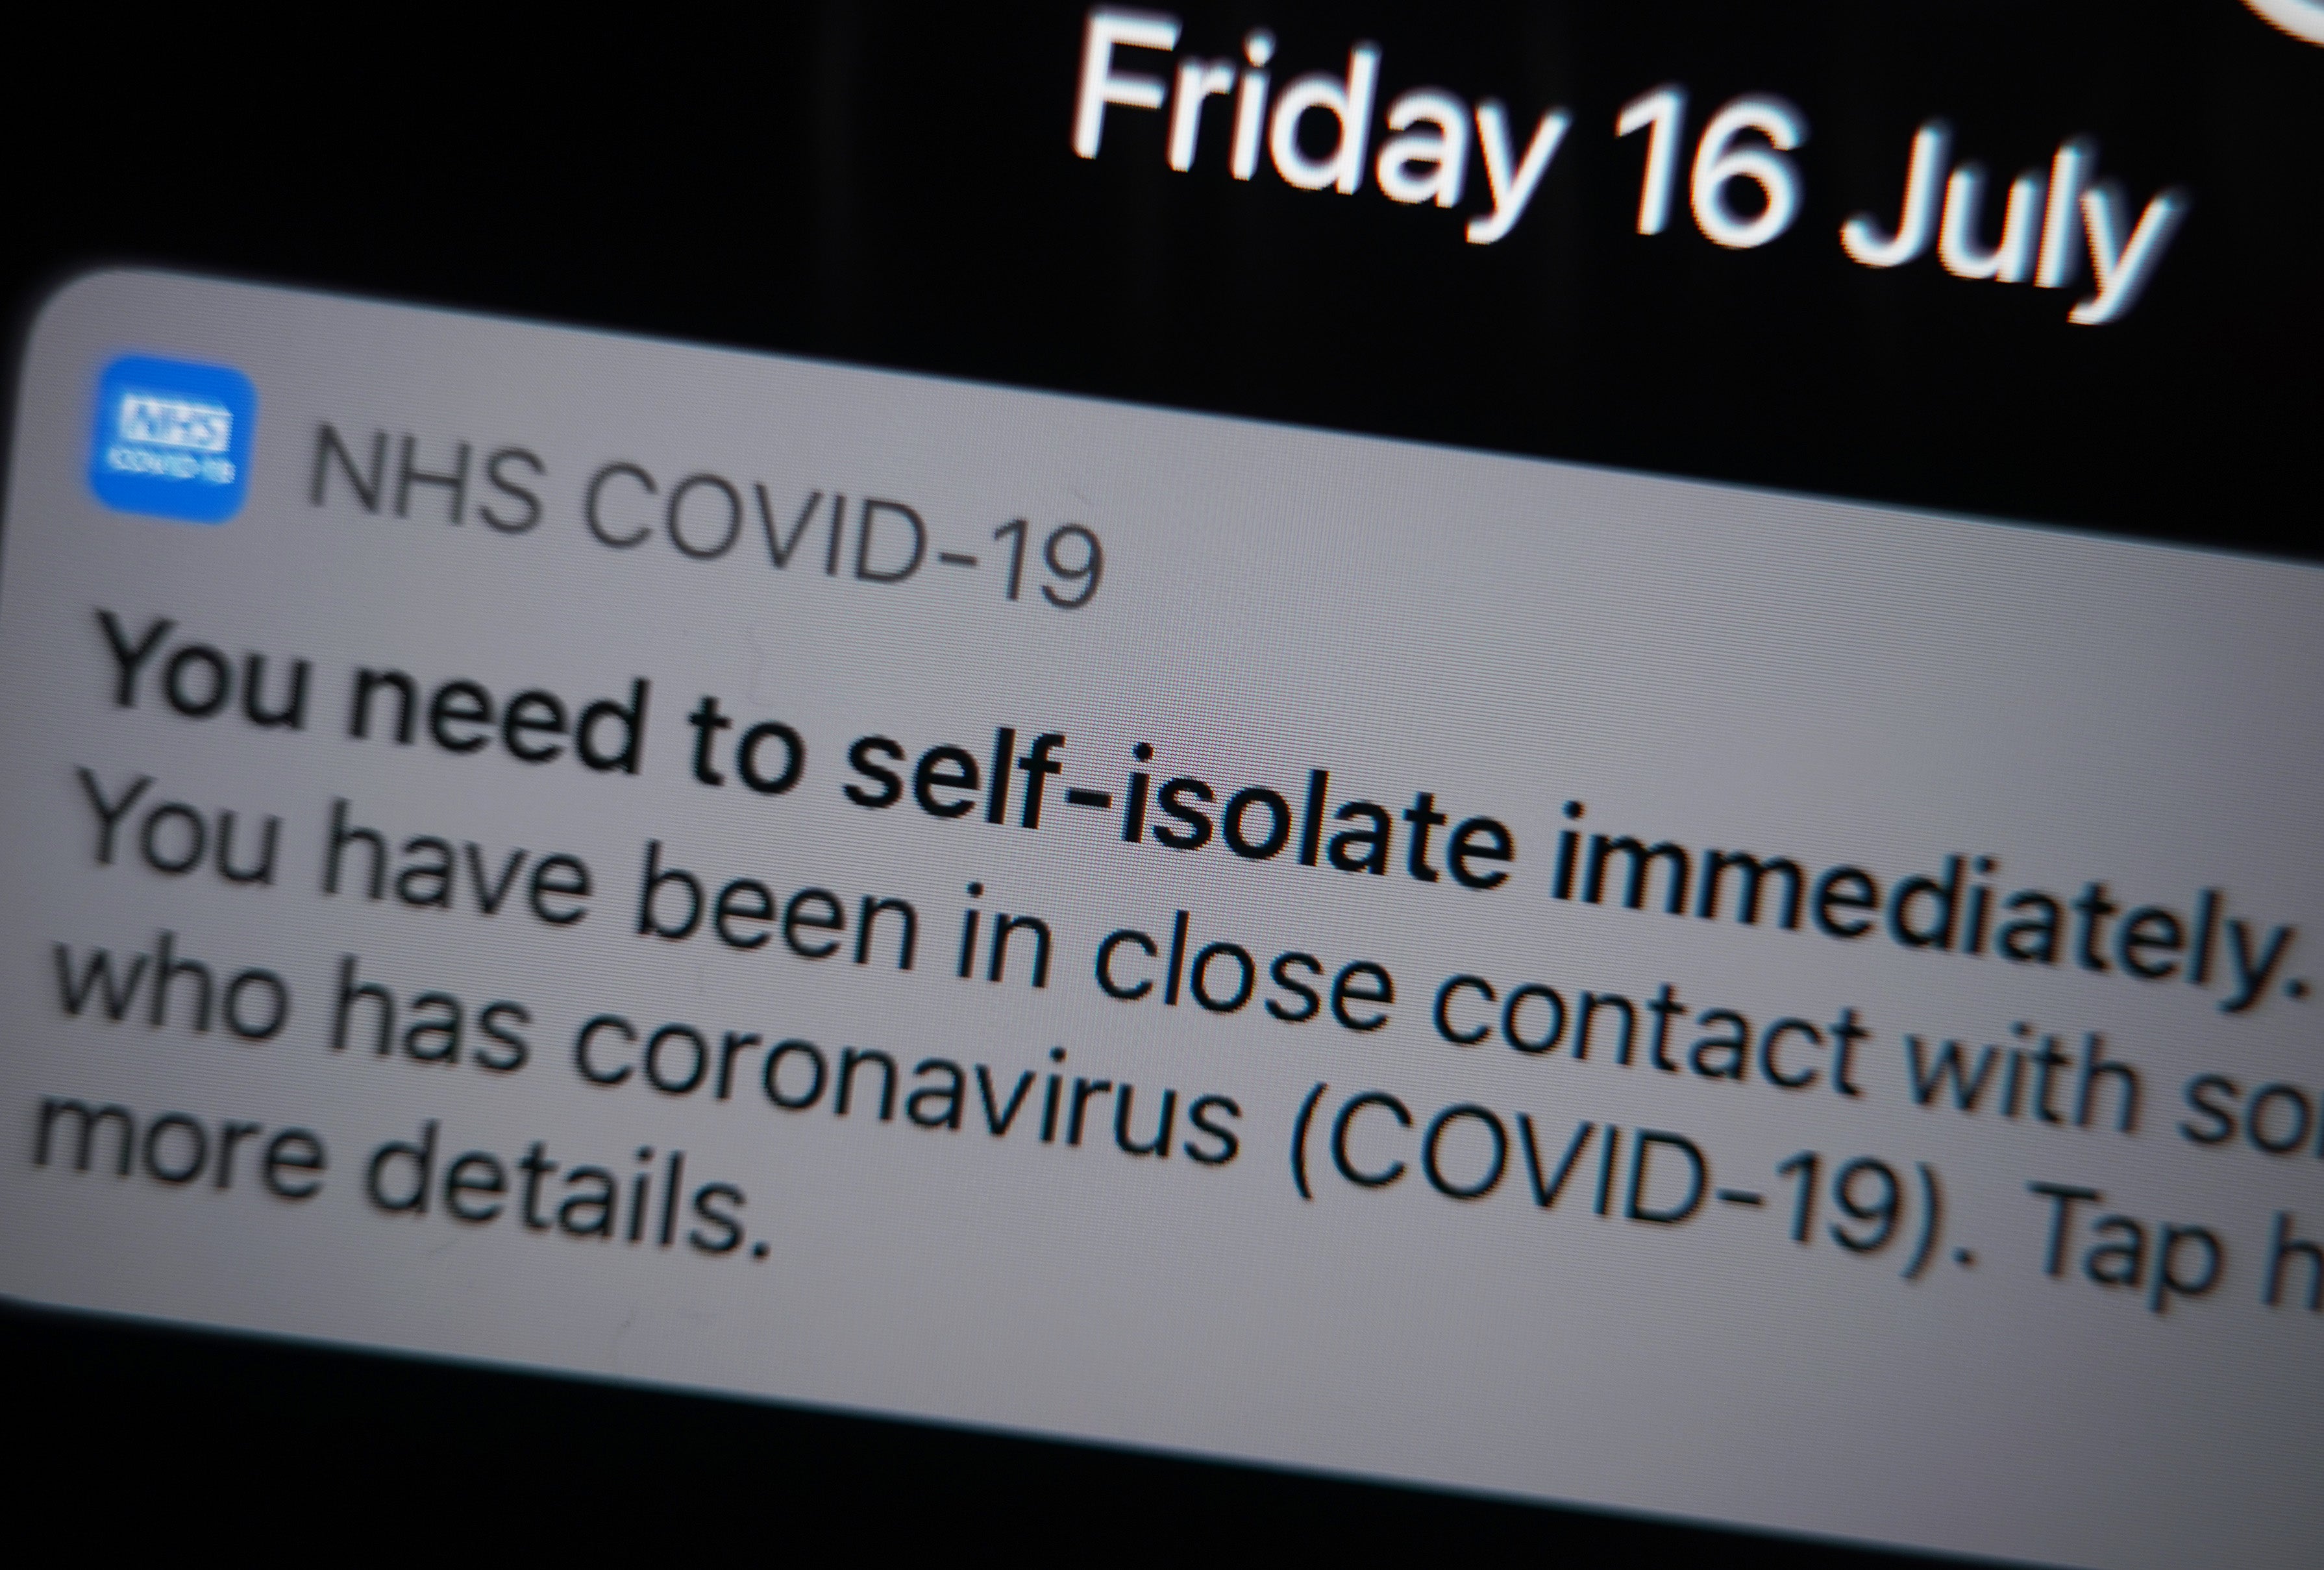 A self-isolate message on the NHS Covid-19 app